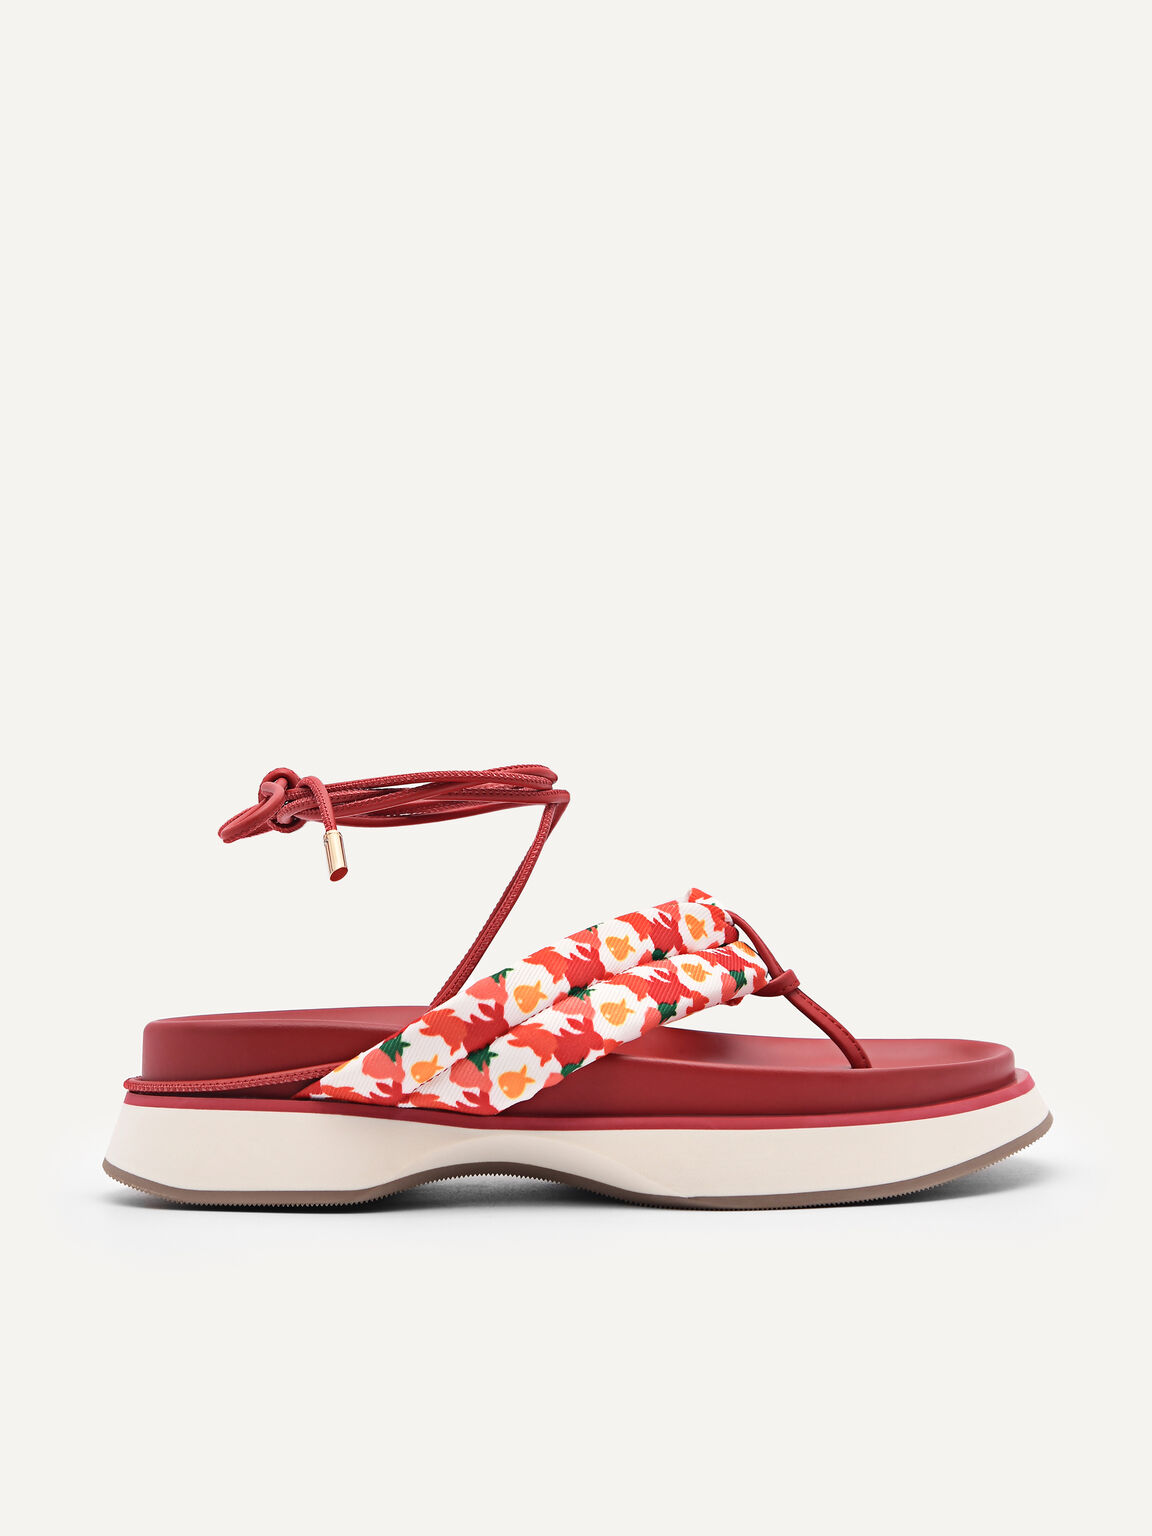 Strappy Thong Sandals, Multi